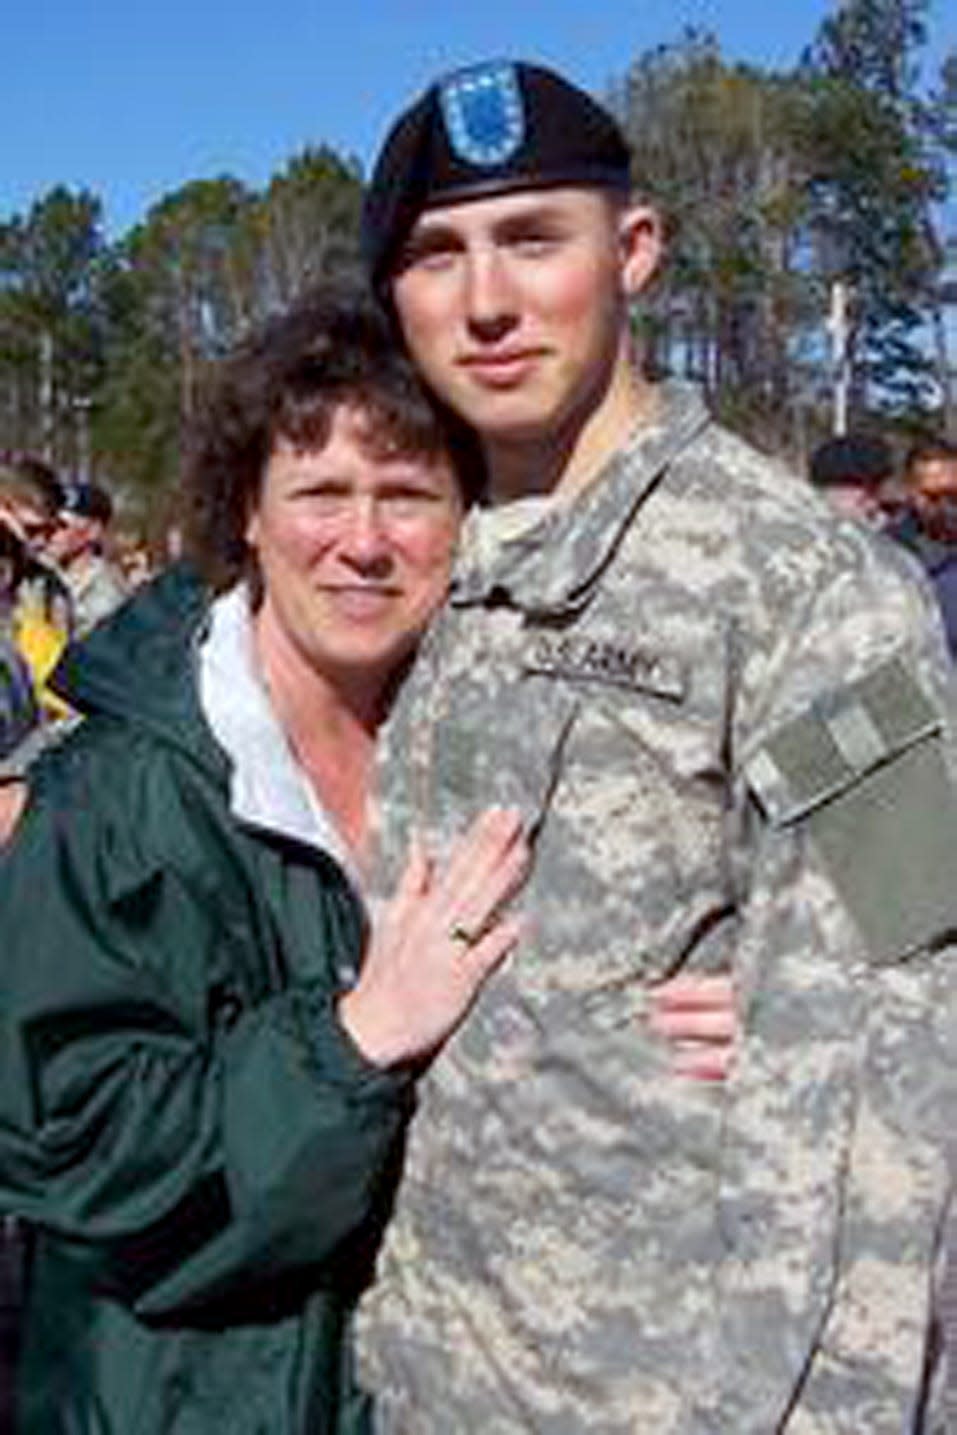 U.S. Army Spc. Zachary Clouser and his mom, Deb Etheridge, pose during a visit home over the Easter holiday.